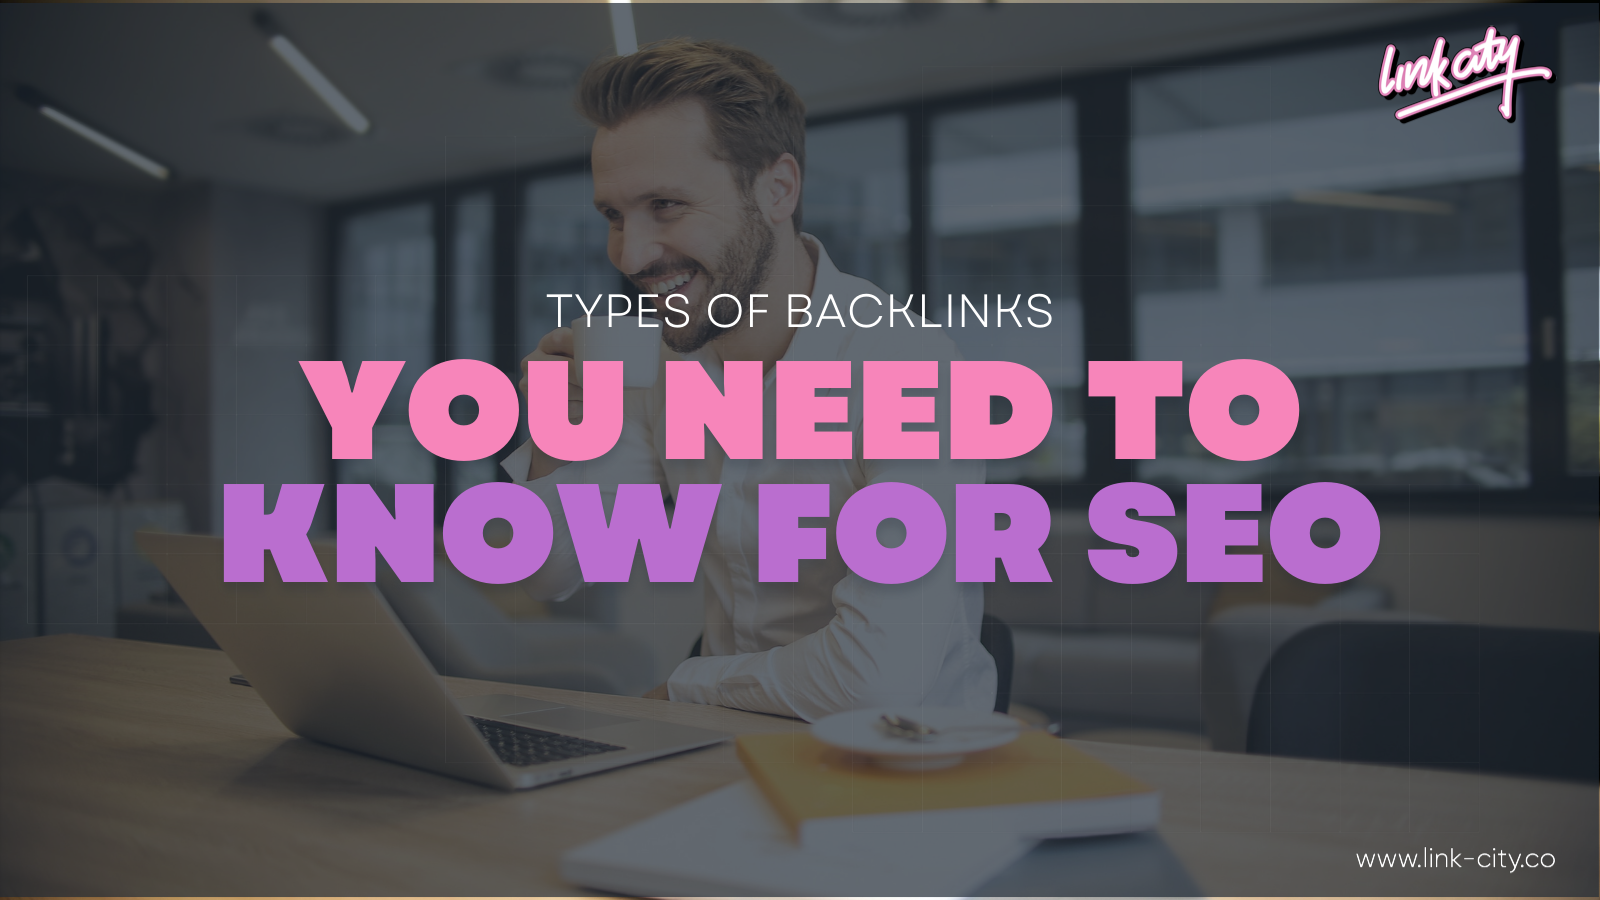 7 Types of Backlinks You Need to Know for SEO